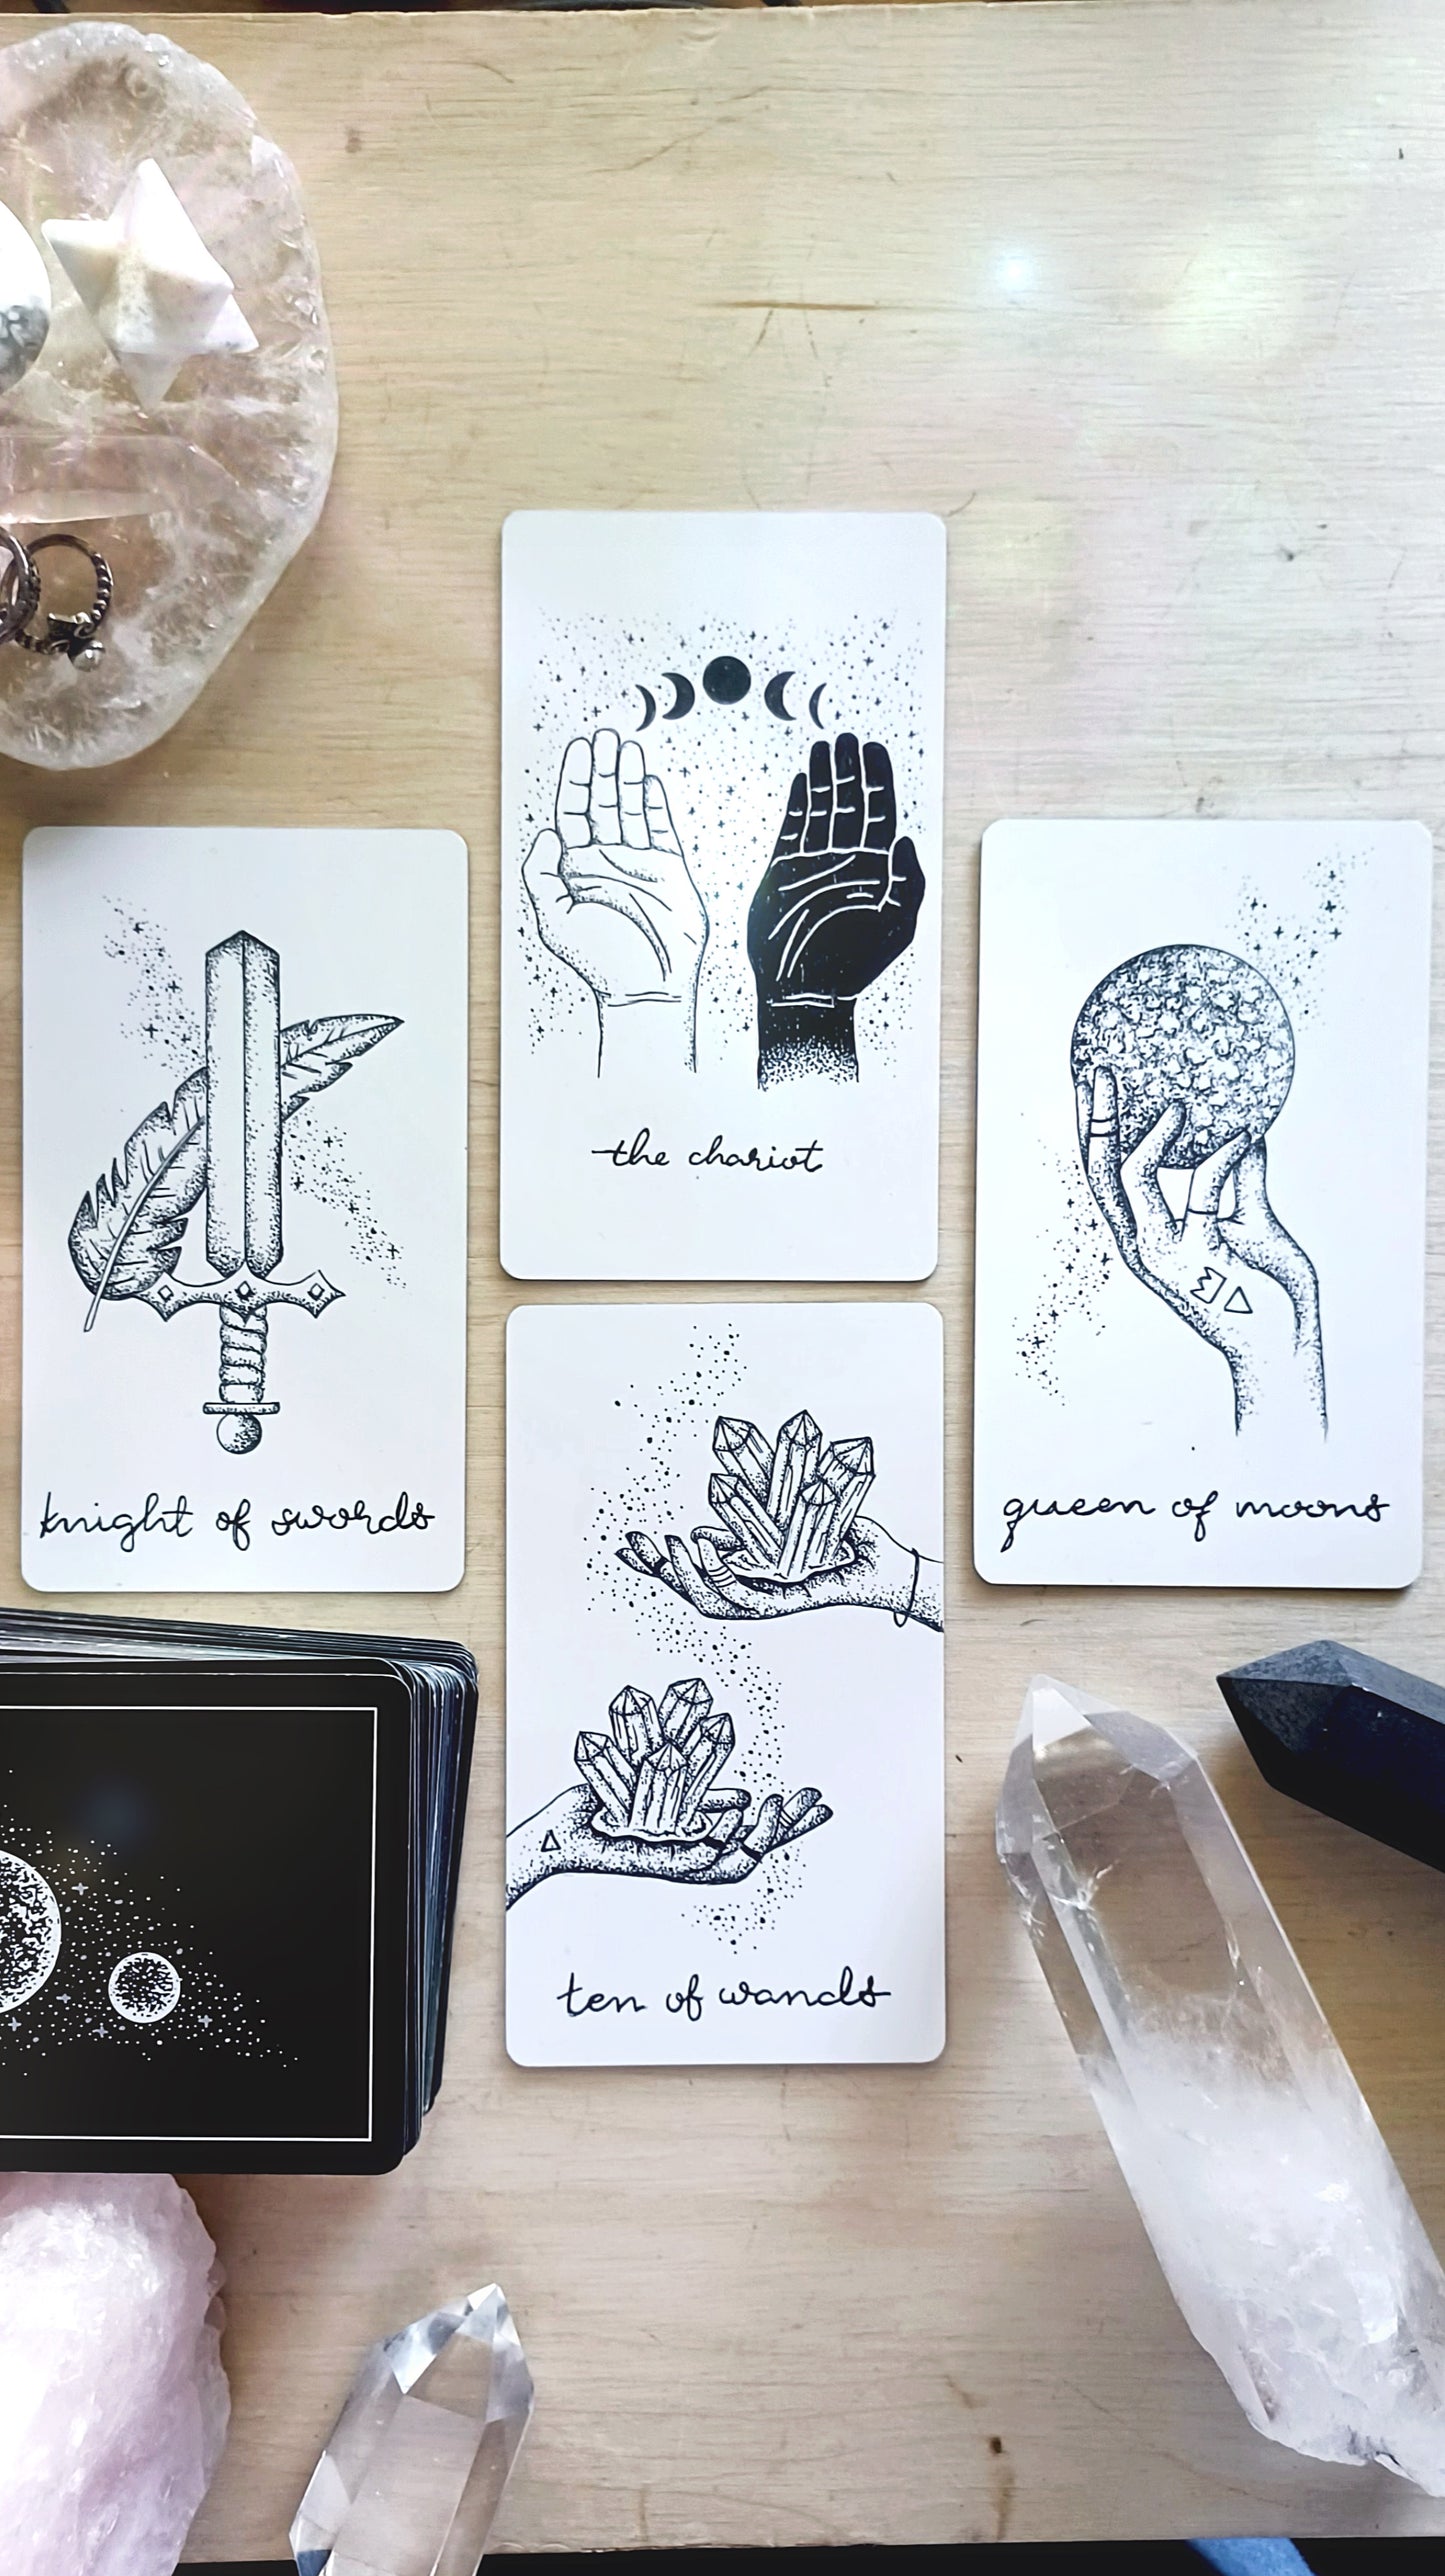 tarot cards deck: aesthetic beginner decks for learning tarot reading & spreads | white & black tarot with holographic edges, minimalist card art with tarot guide booklet